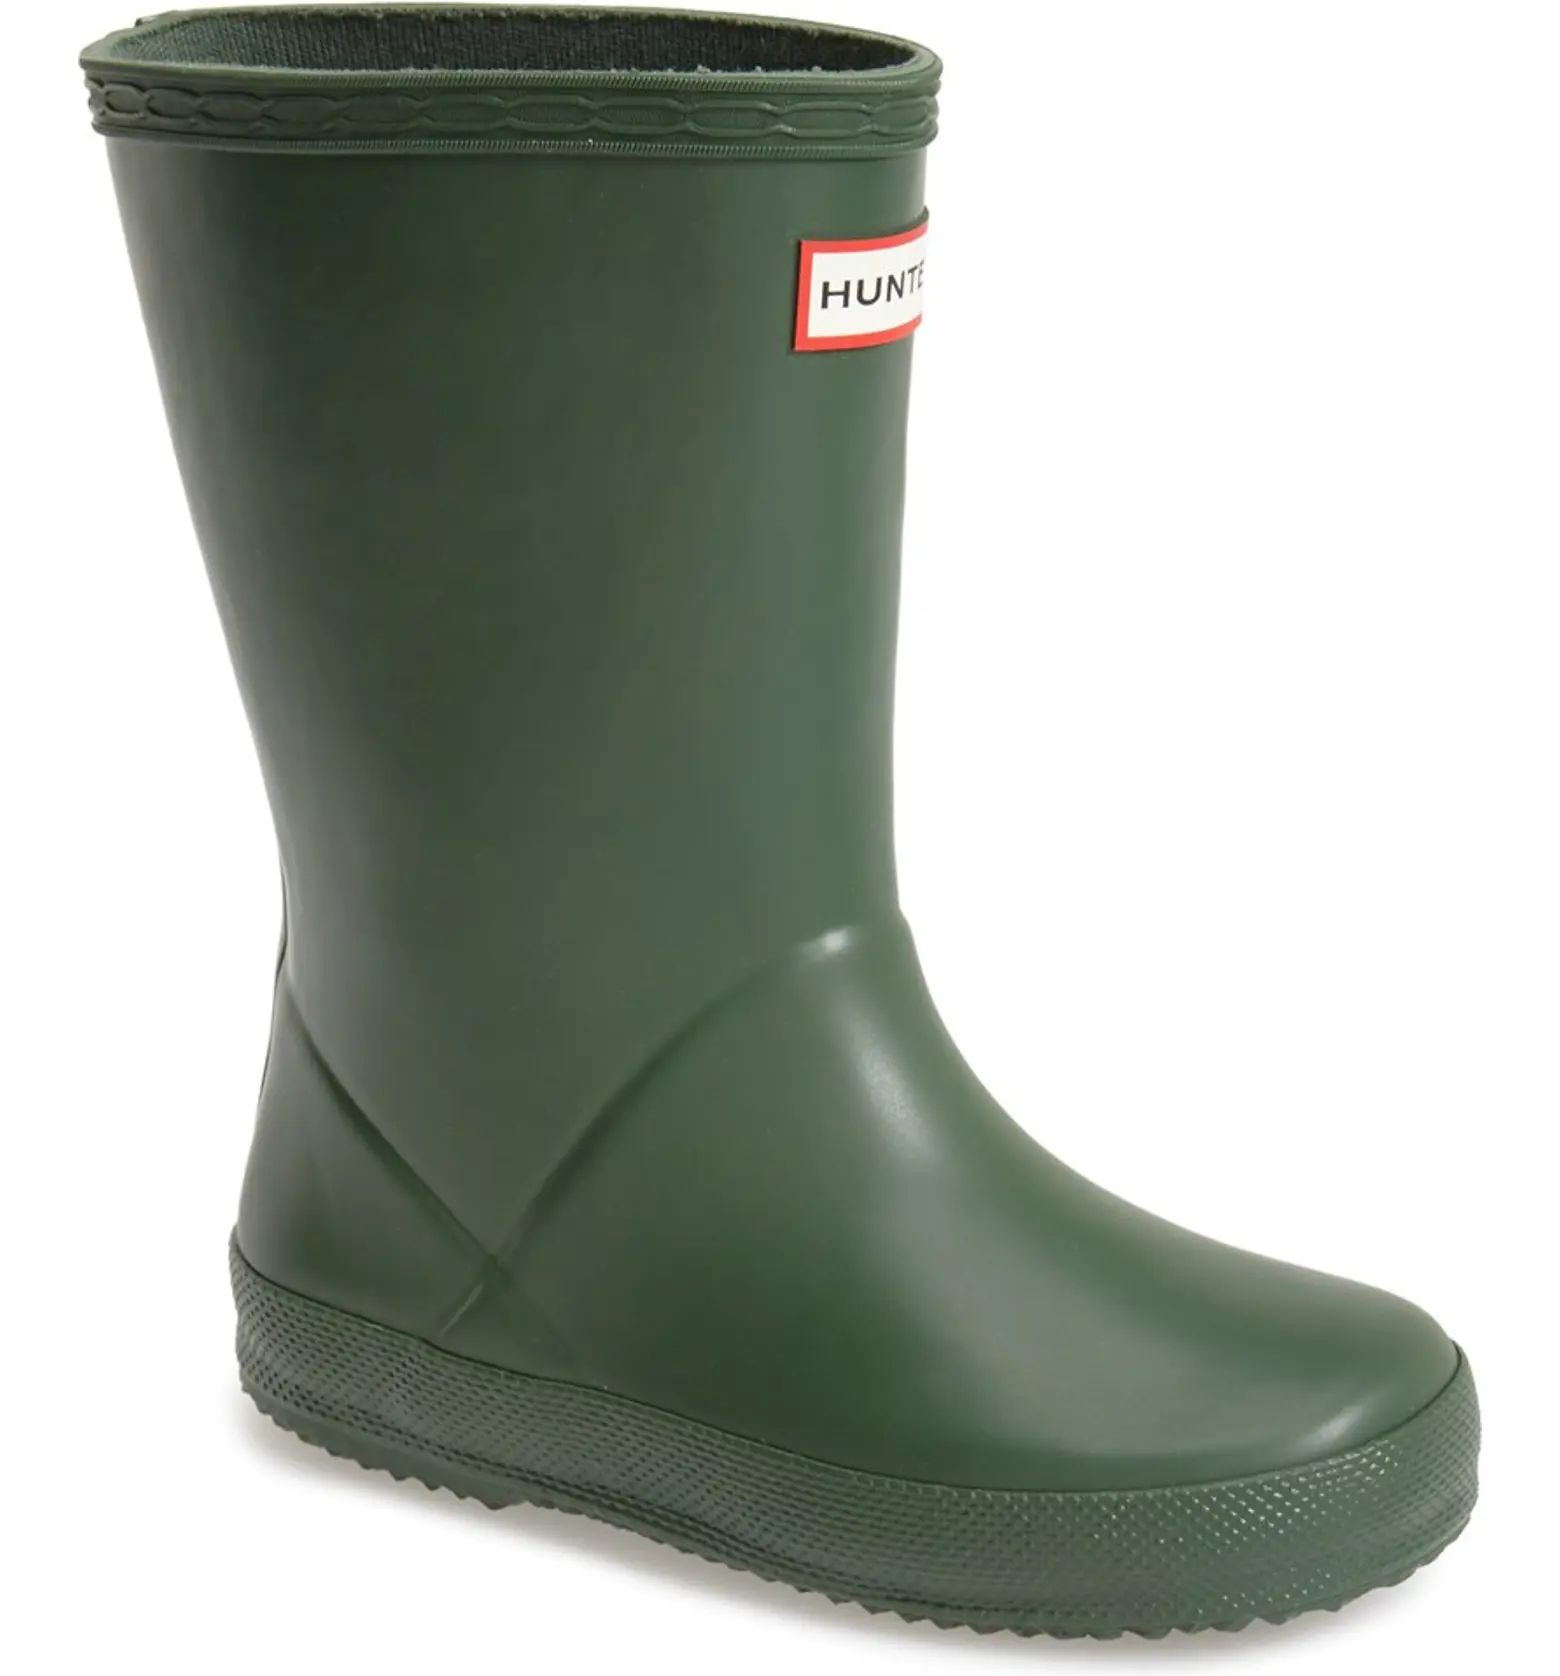 Rating 4.7out of5stars(1.3K)1261First Classic Waterproof Rain BootHUNTER | Nordstrom